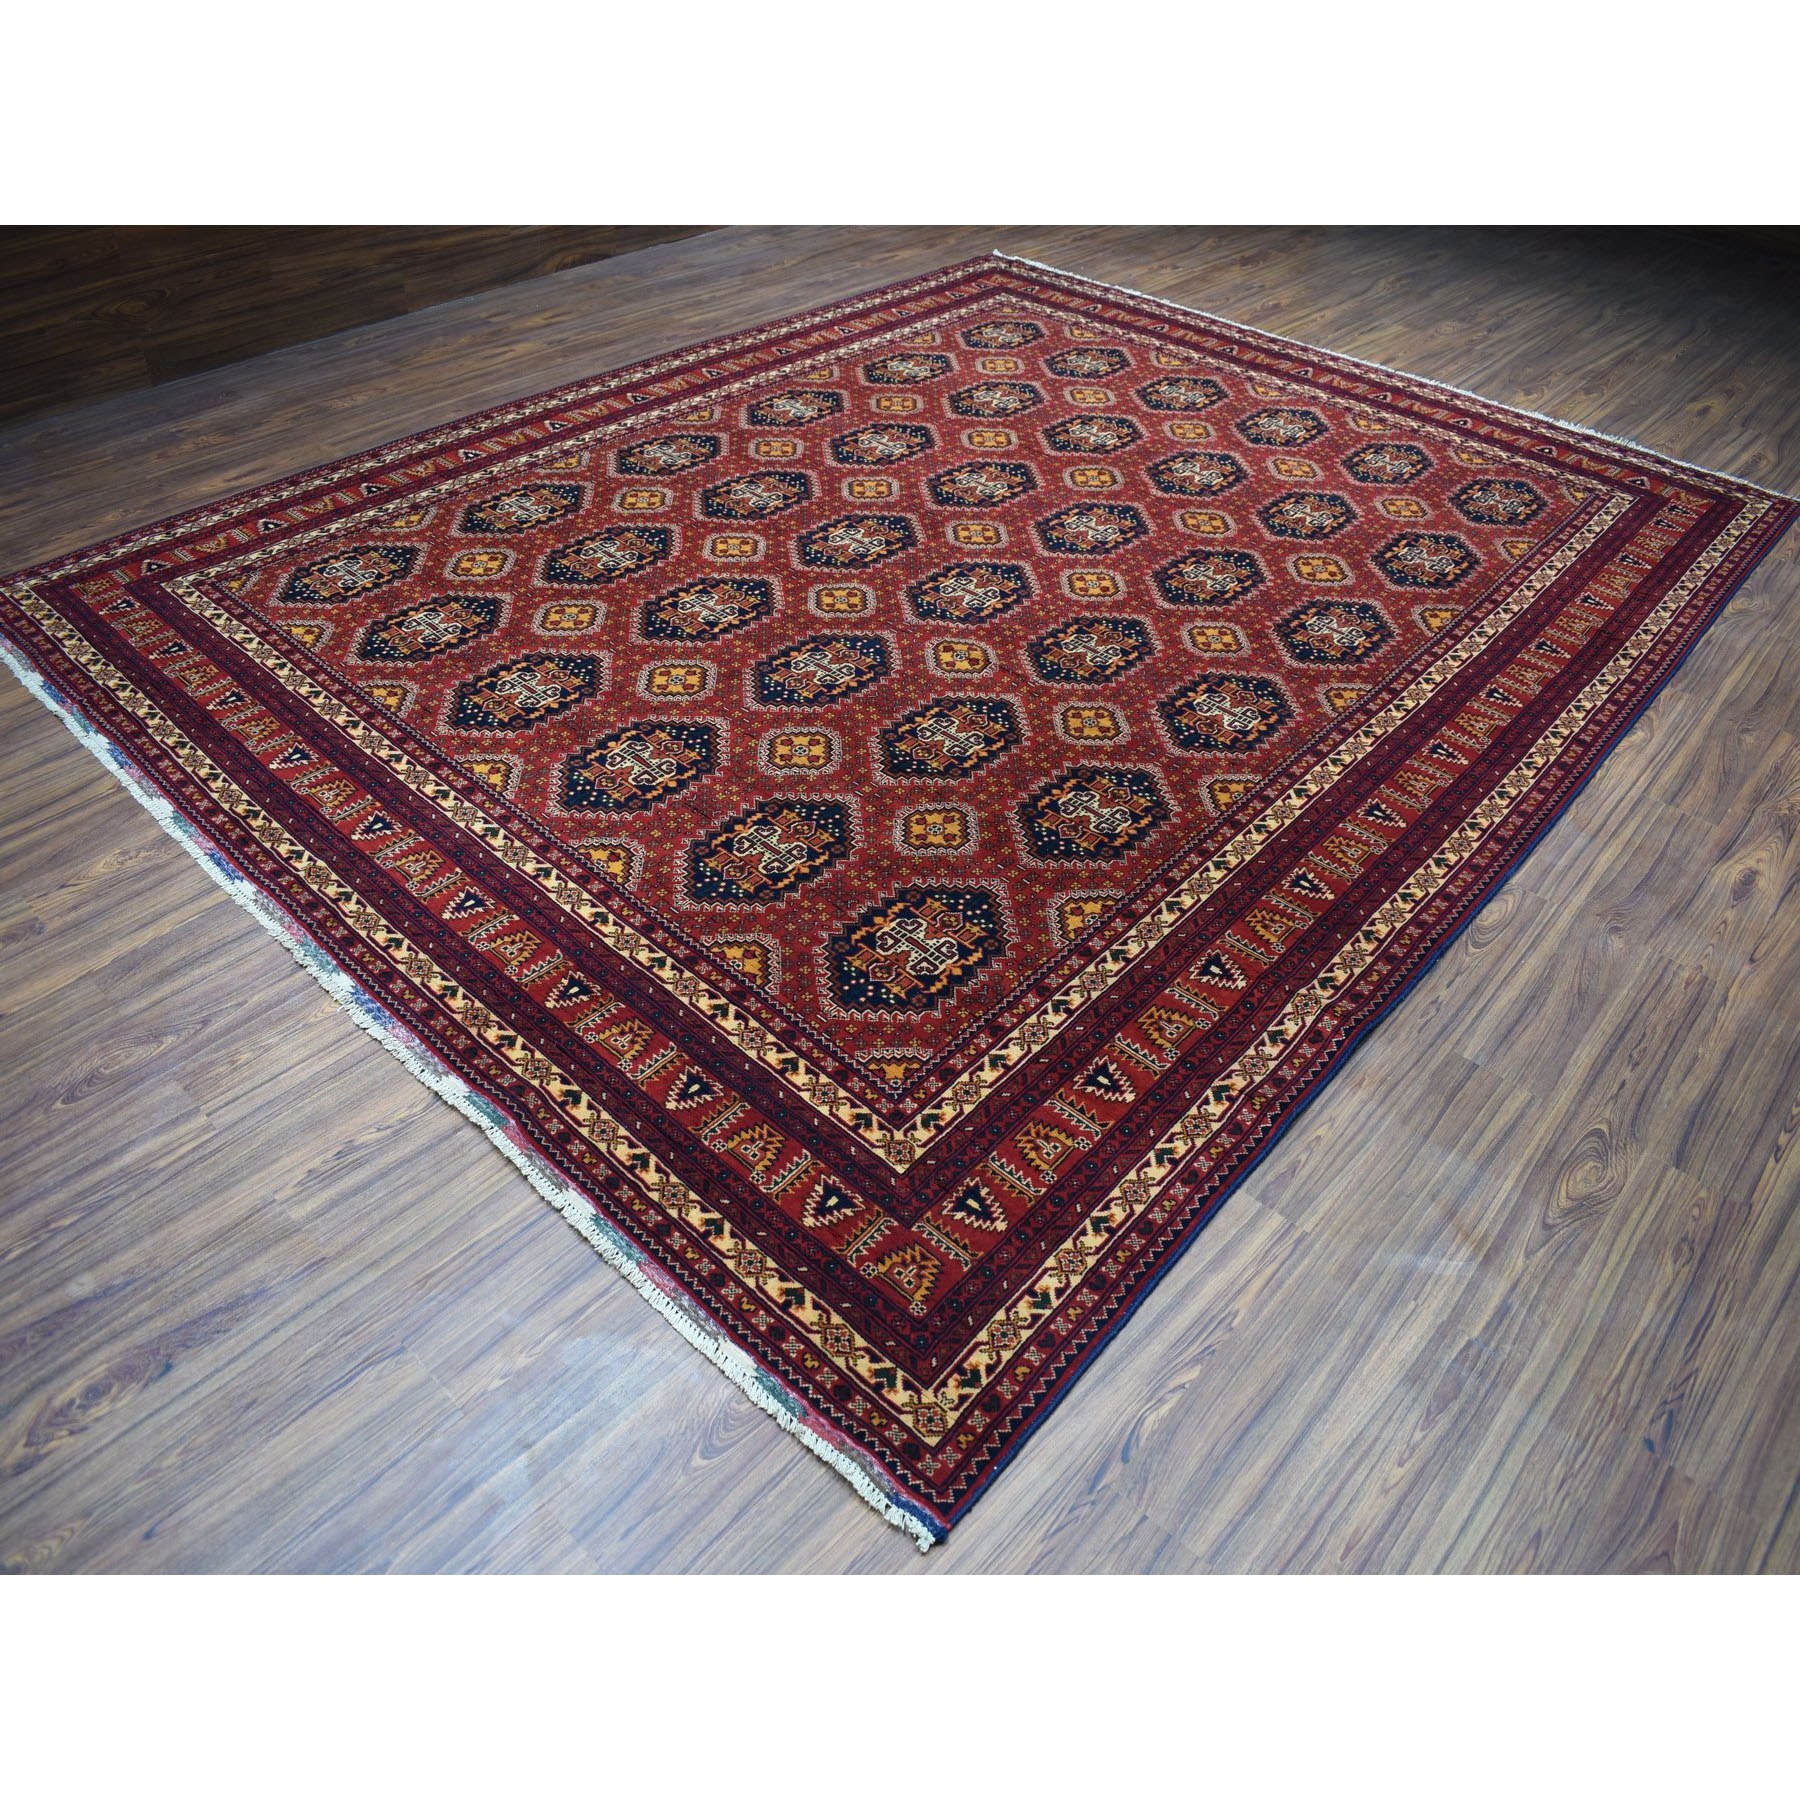 10-1 x12-5  Repetitive Design Pure Wool Afghan Khamyab Hand-Knotted Oriental Rug 